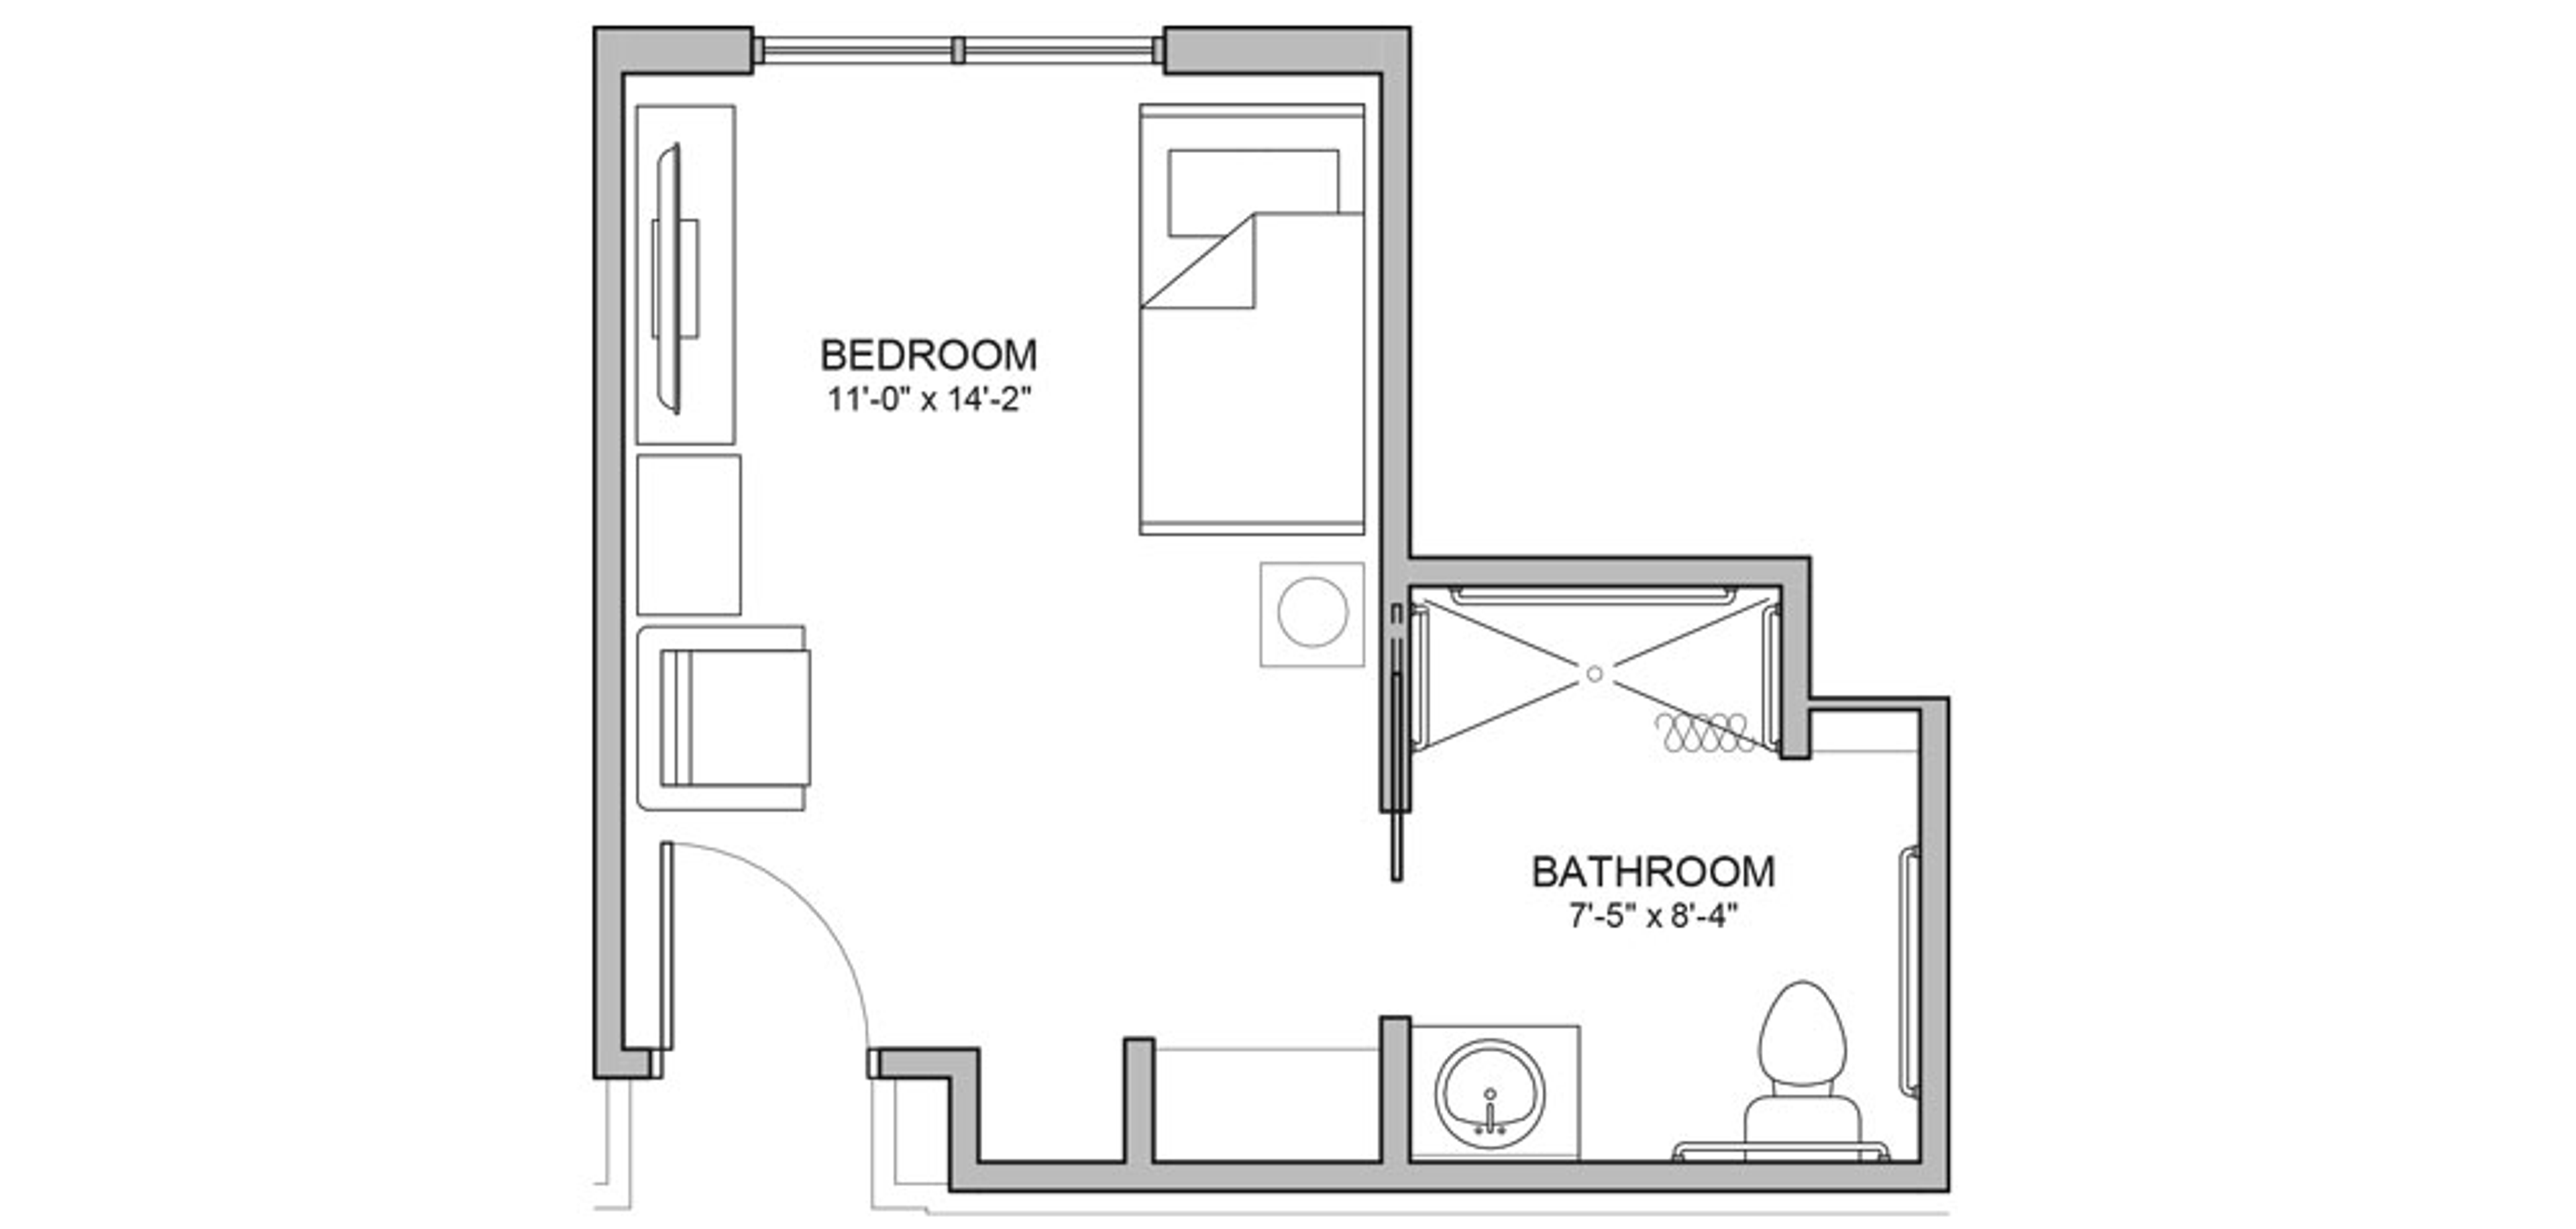 Floorplan - The Auberge at Bee Cave - The Barton Floor Plan, 1 bed, 1 bath, 252 sq. ft. Memory Care